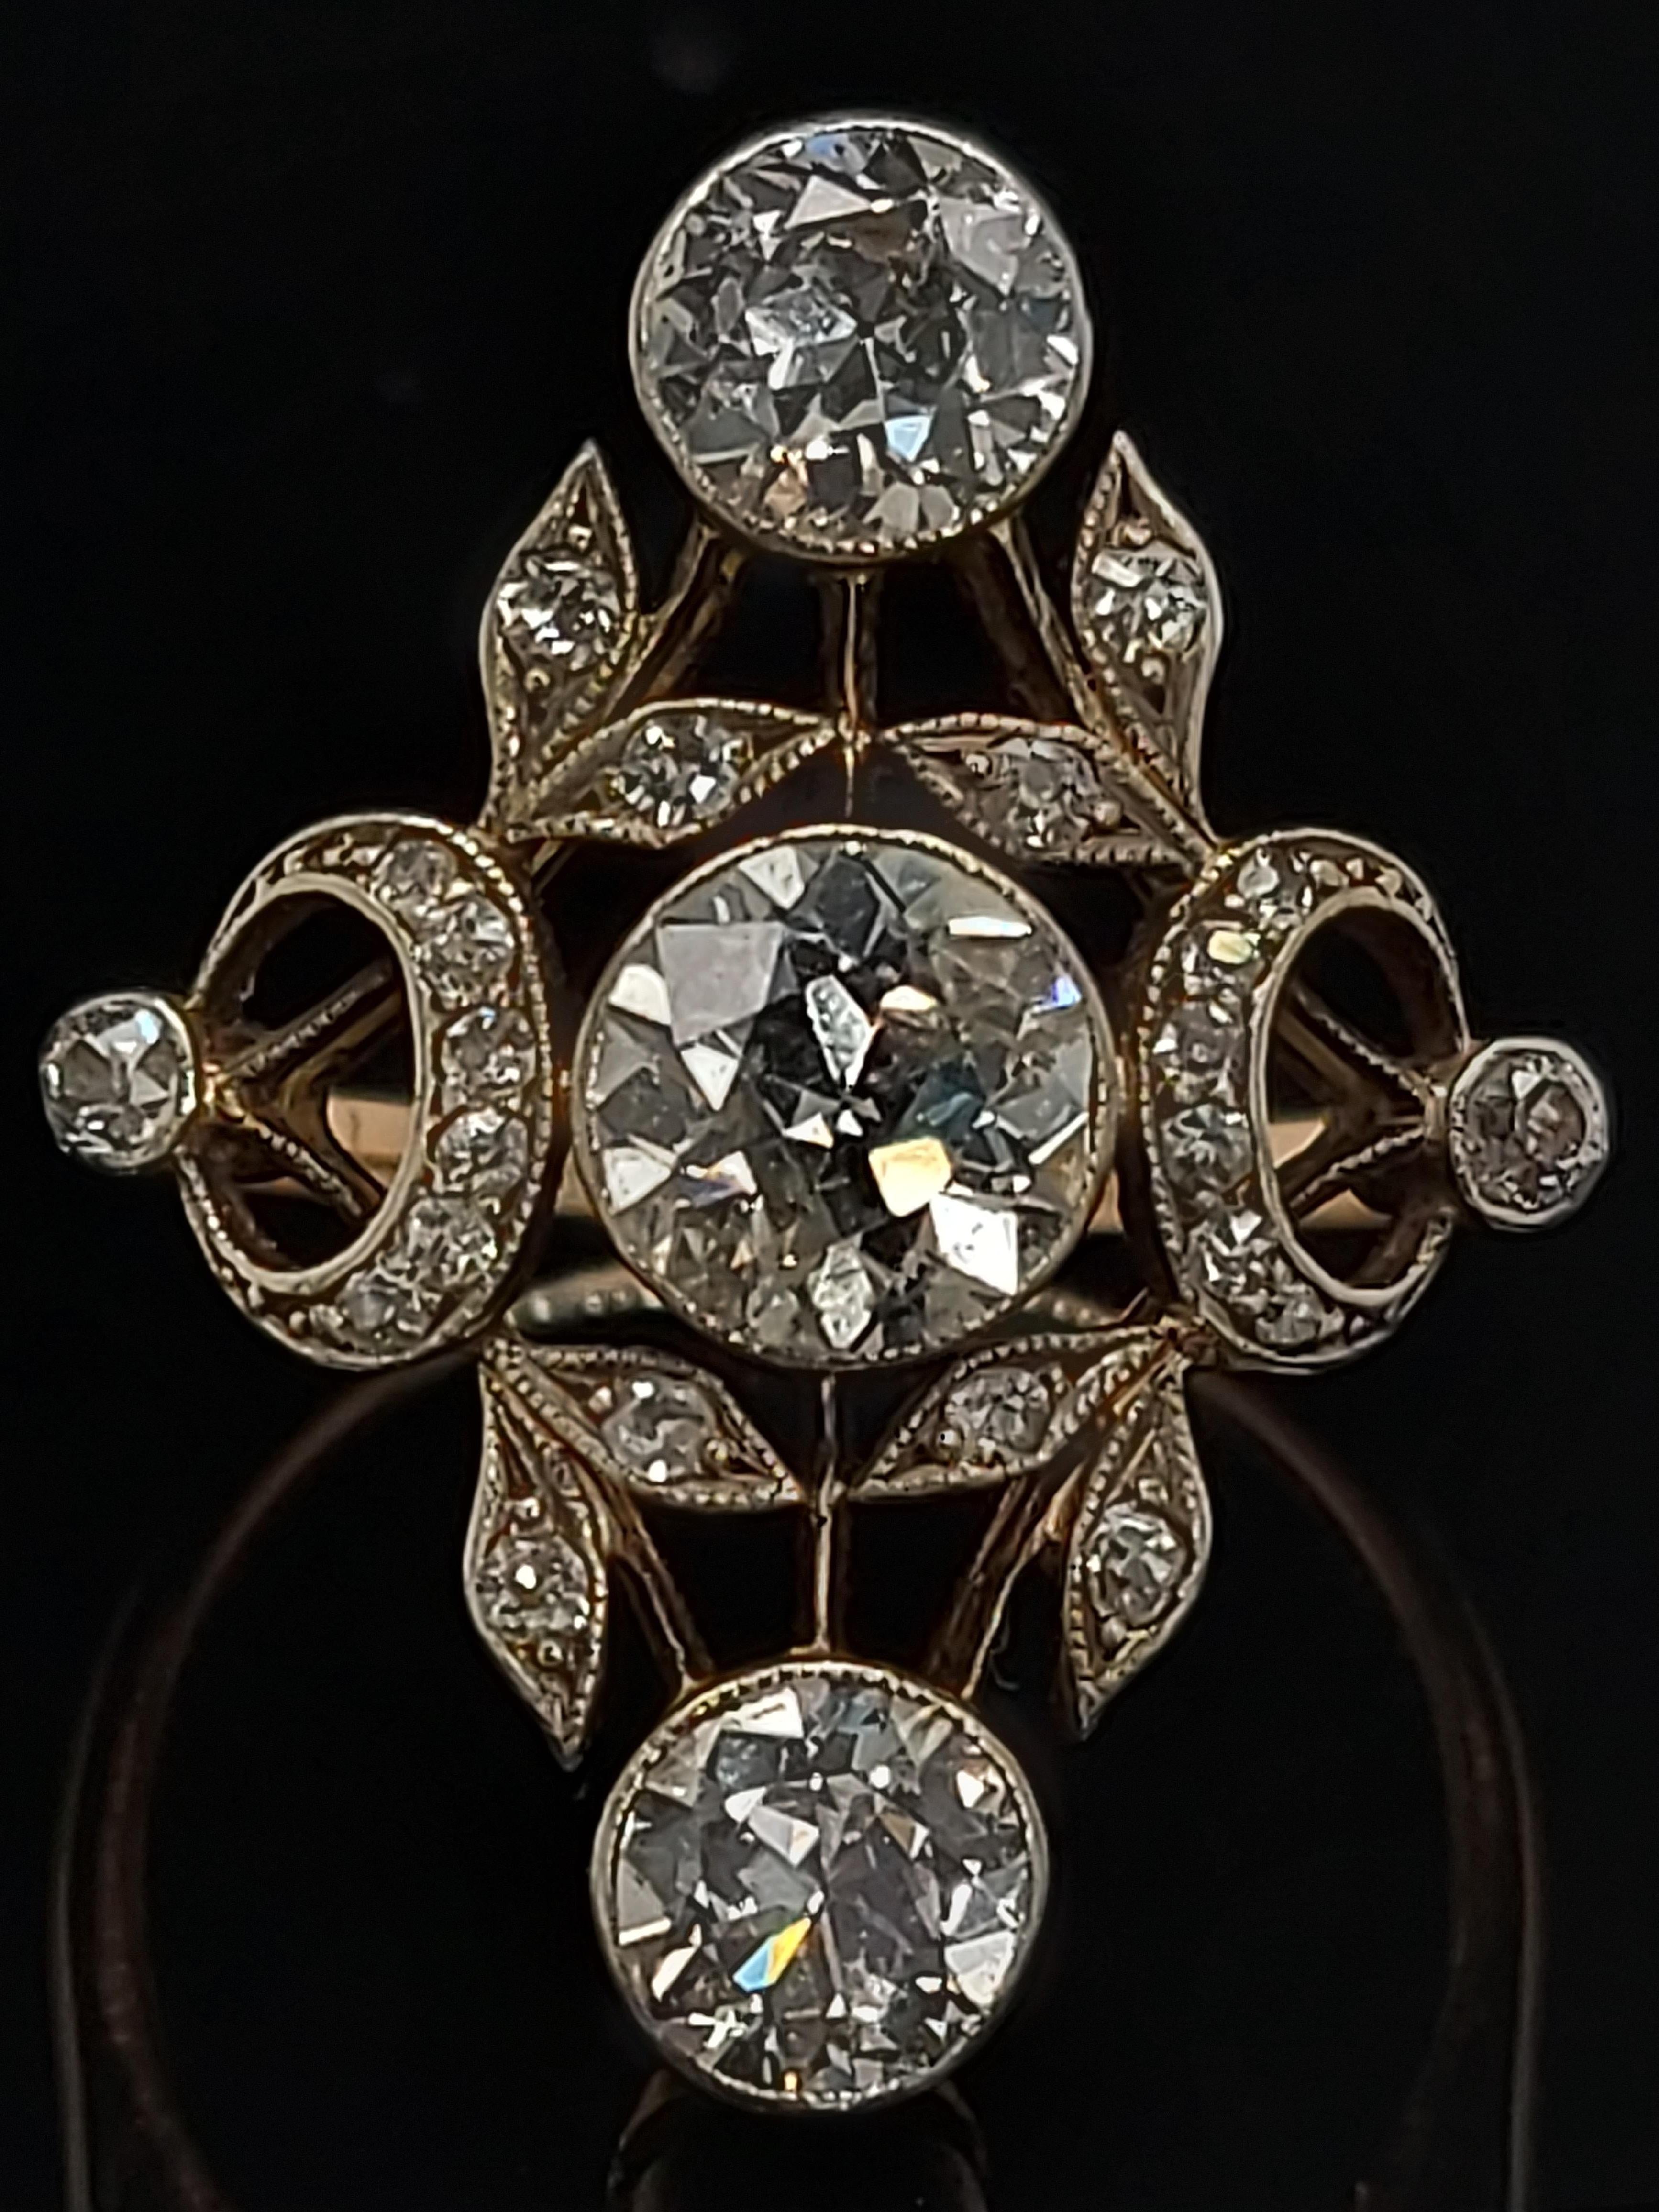 Stunning 18 kt Gold & Silver Ring With Diamonds from the 1900's ,Trilogy

Diamonds: 25 diamonds ,3 Big Old Cut Diamonds 2° of Ca. 0.7 each and center Ca. 1 Ct.

Material: 18 kt gold and silver

Dimensions: Top of ring 20 mm x 24.6 mm

Ring size: